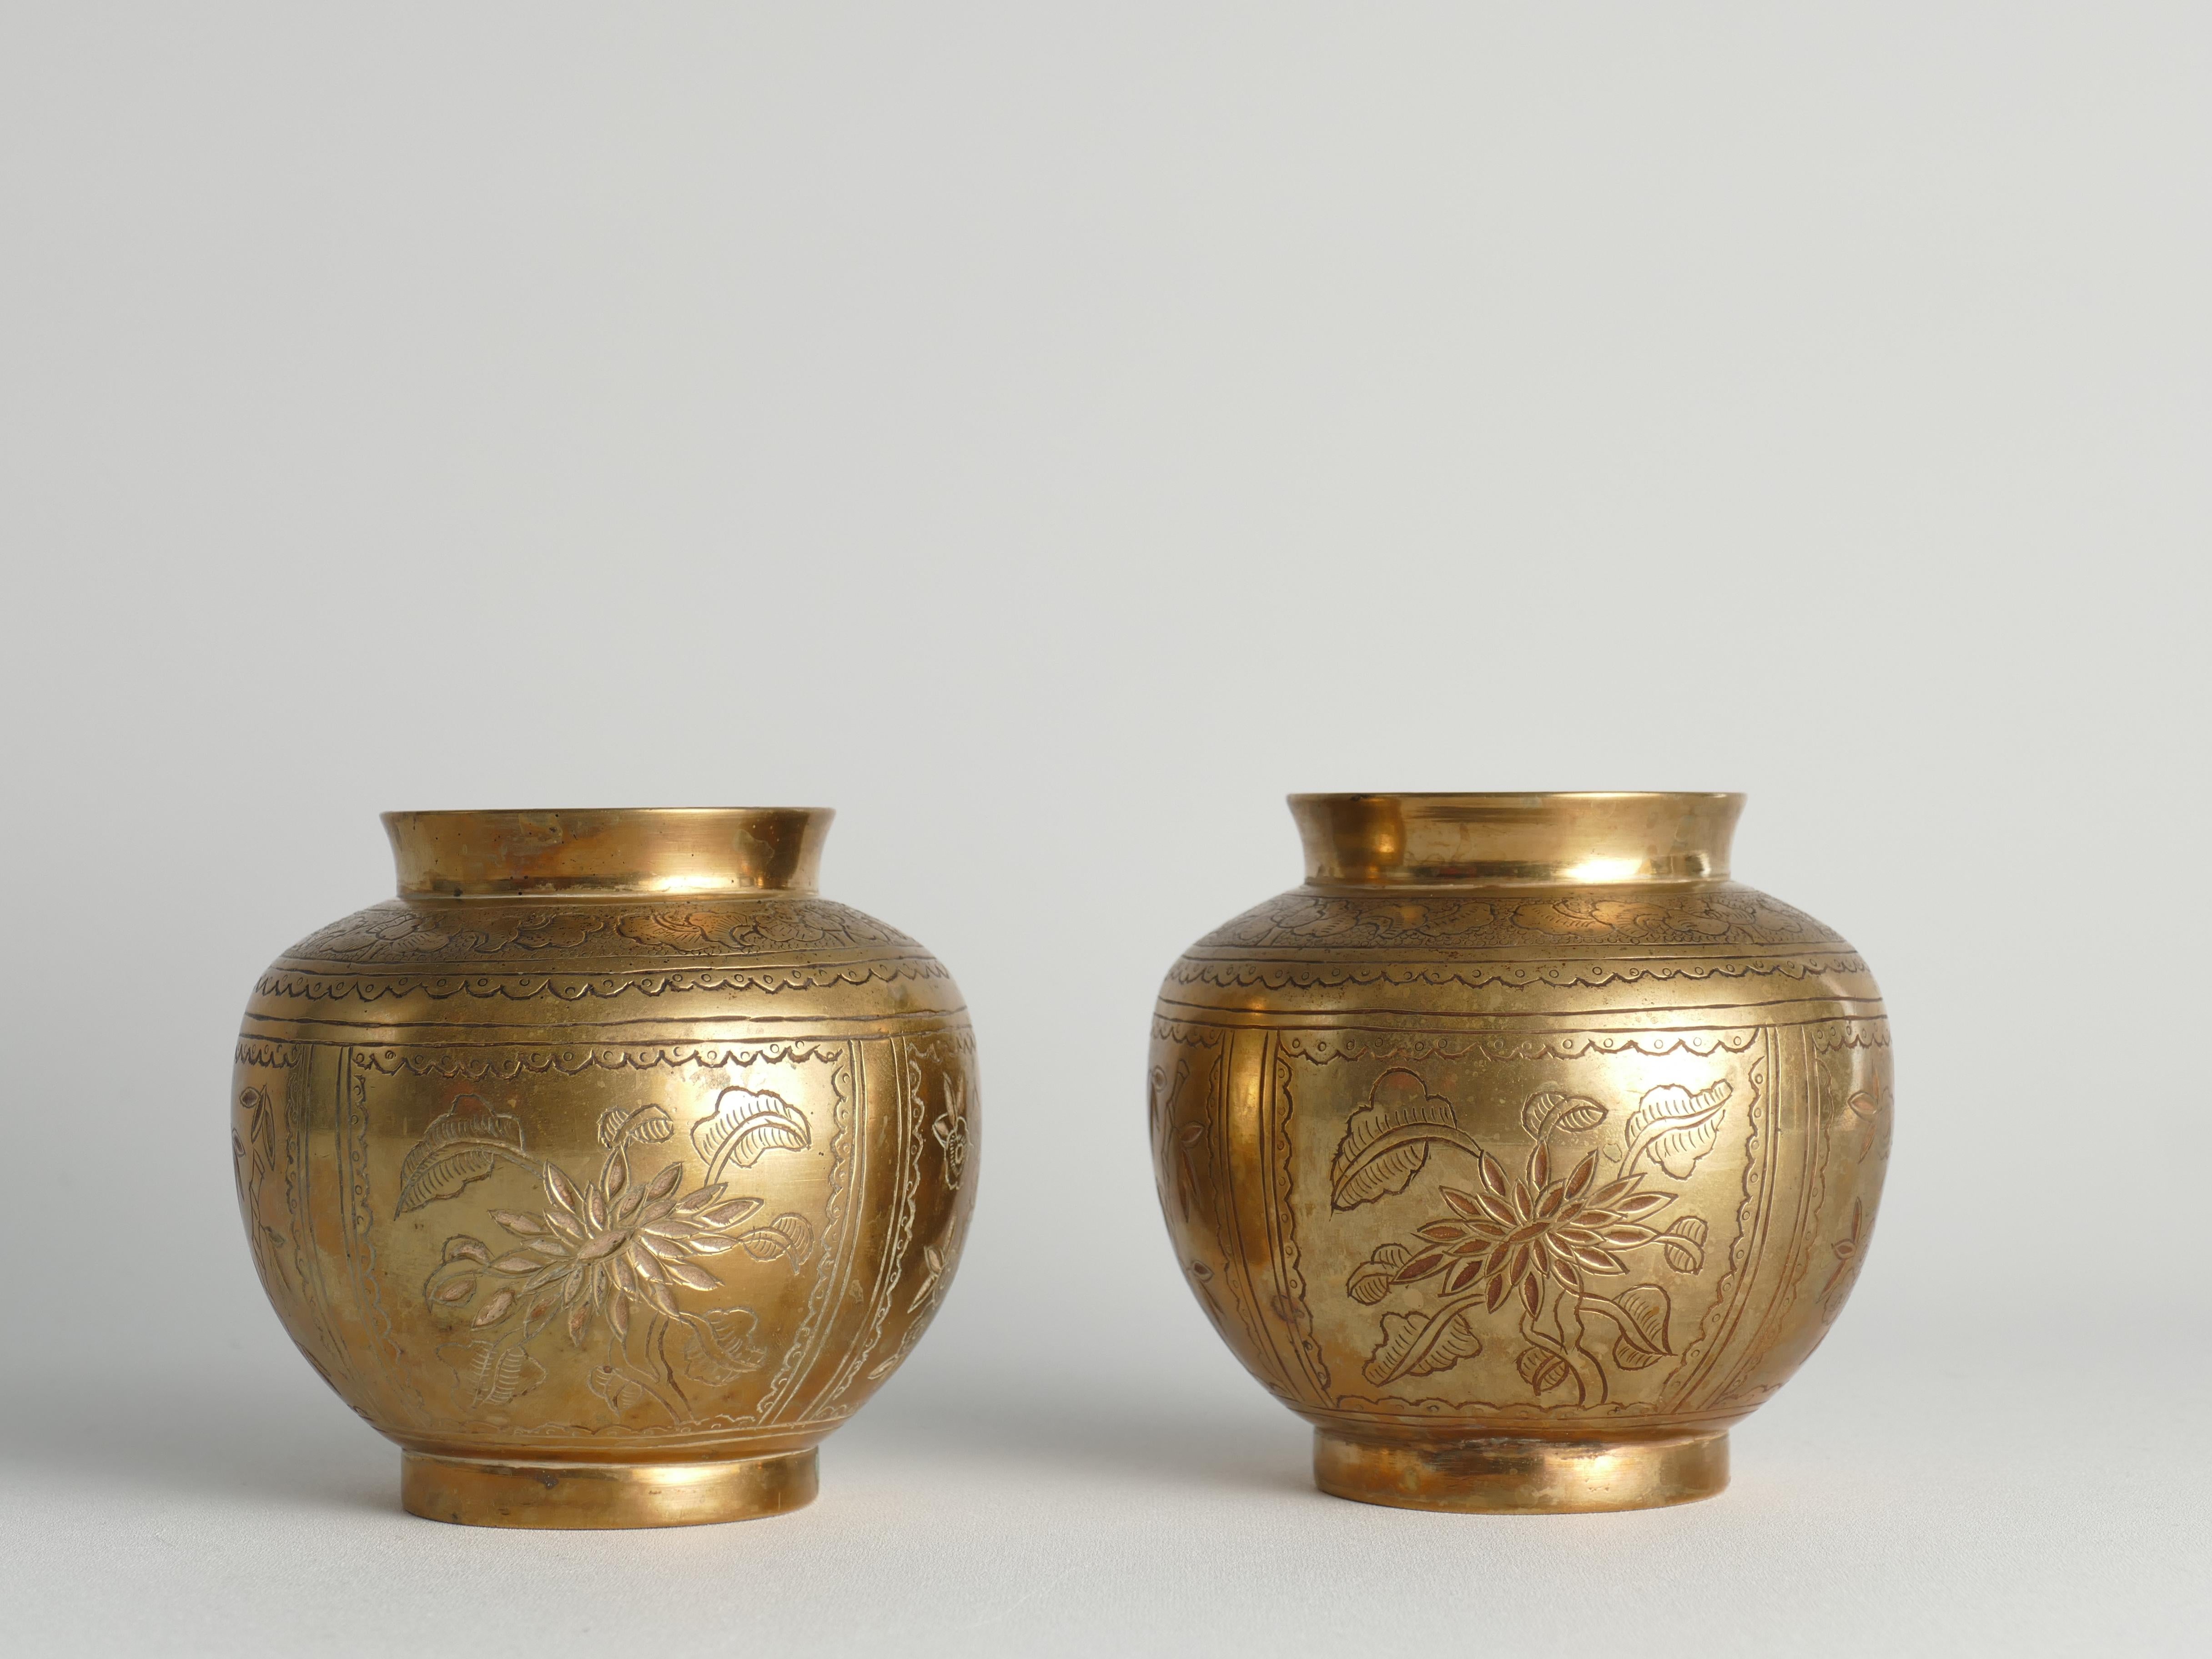 A pair of Chinese brass vases depicting the 